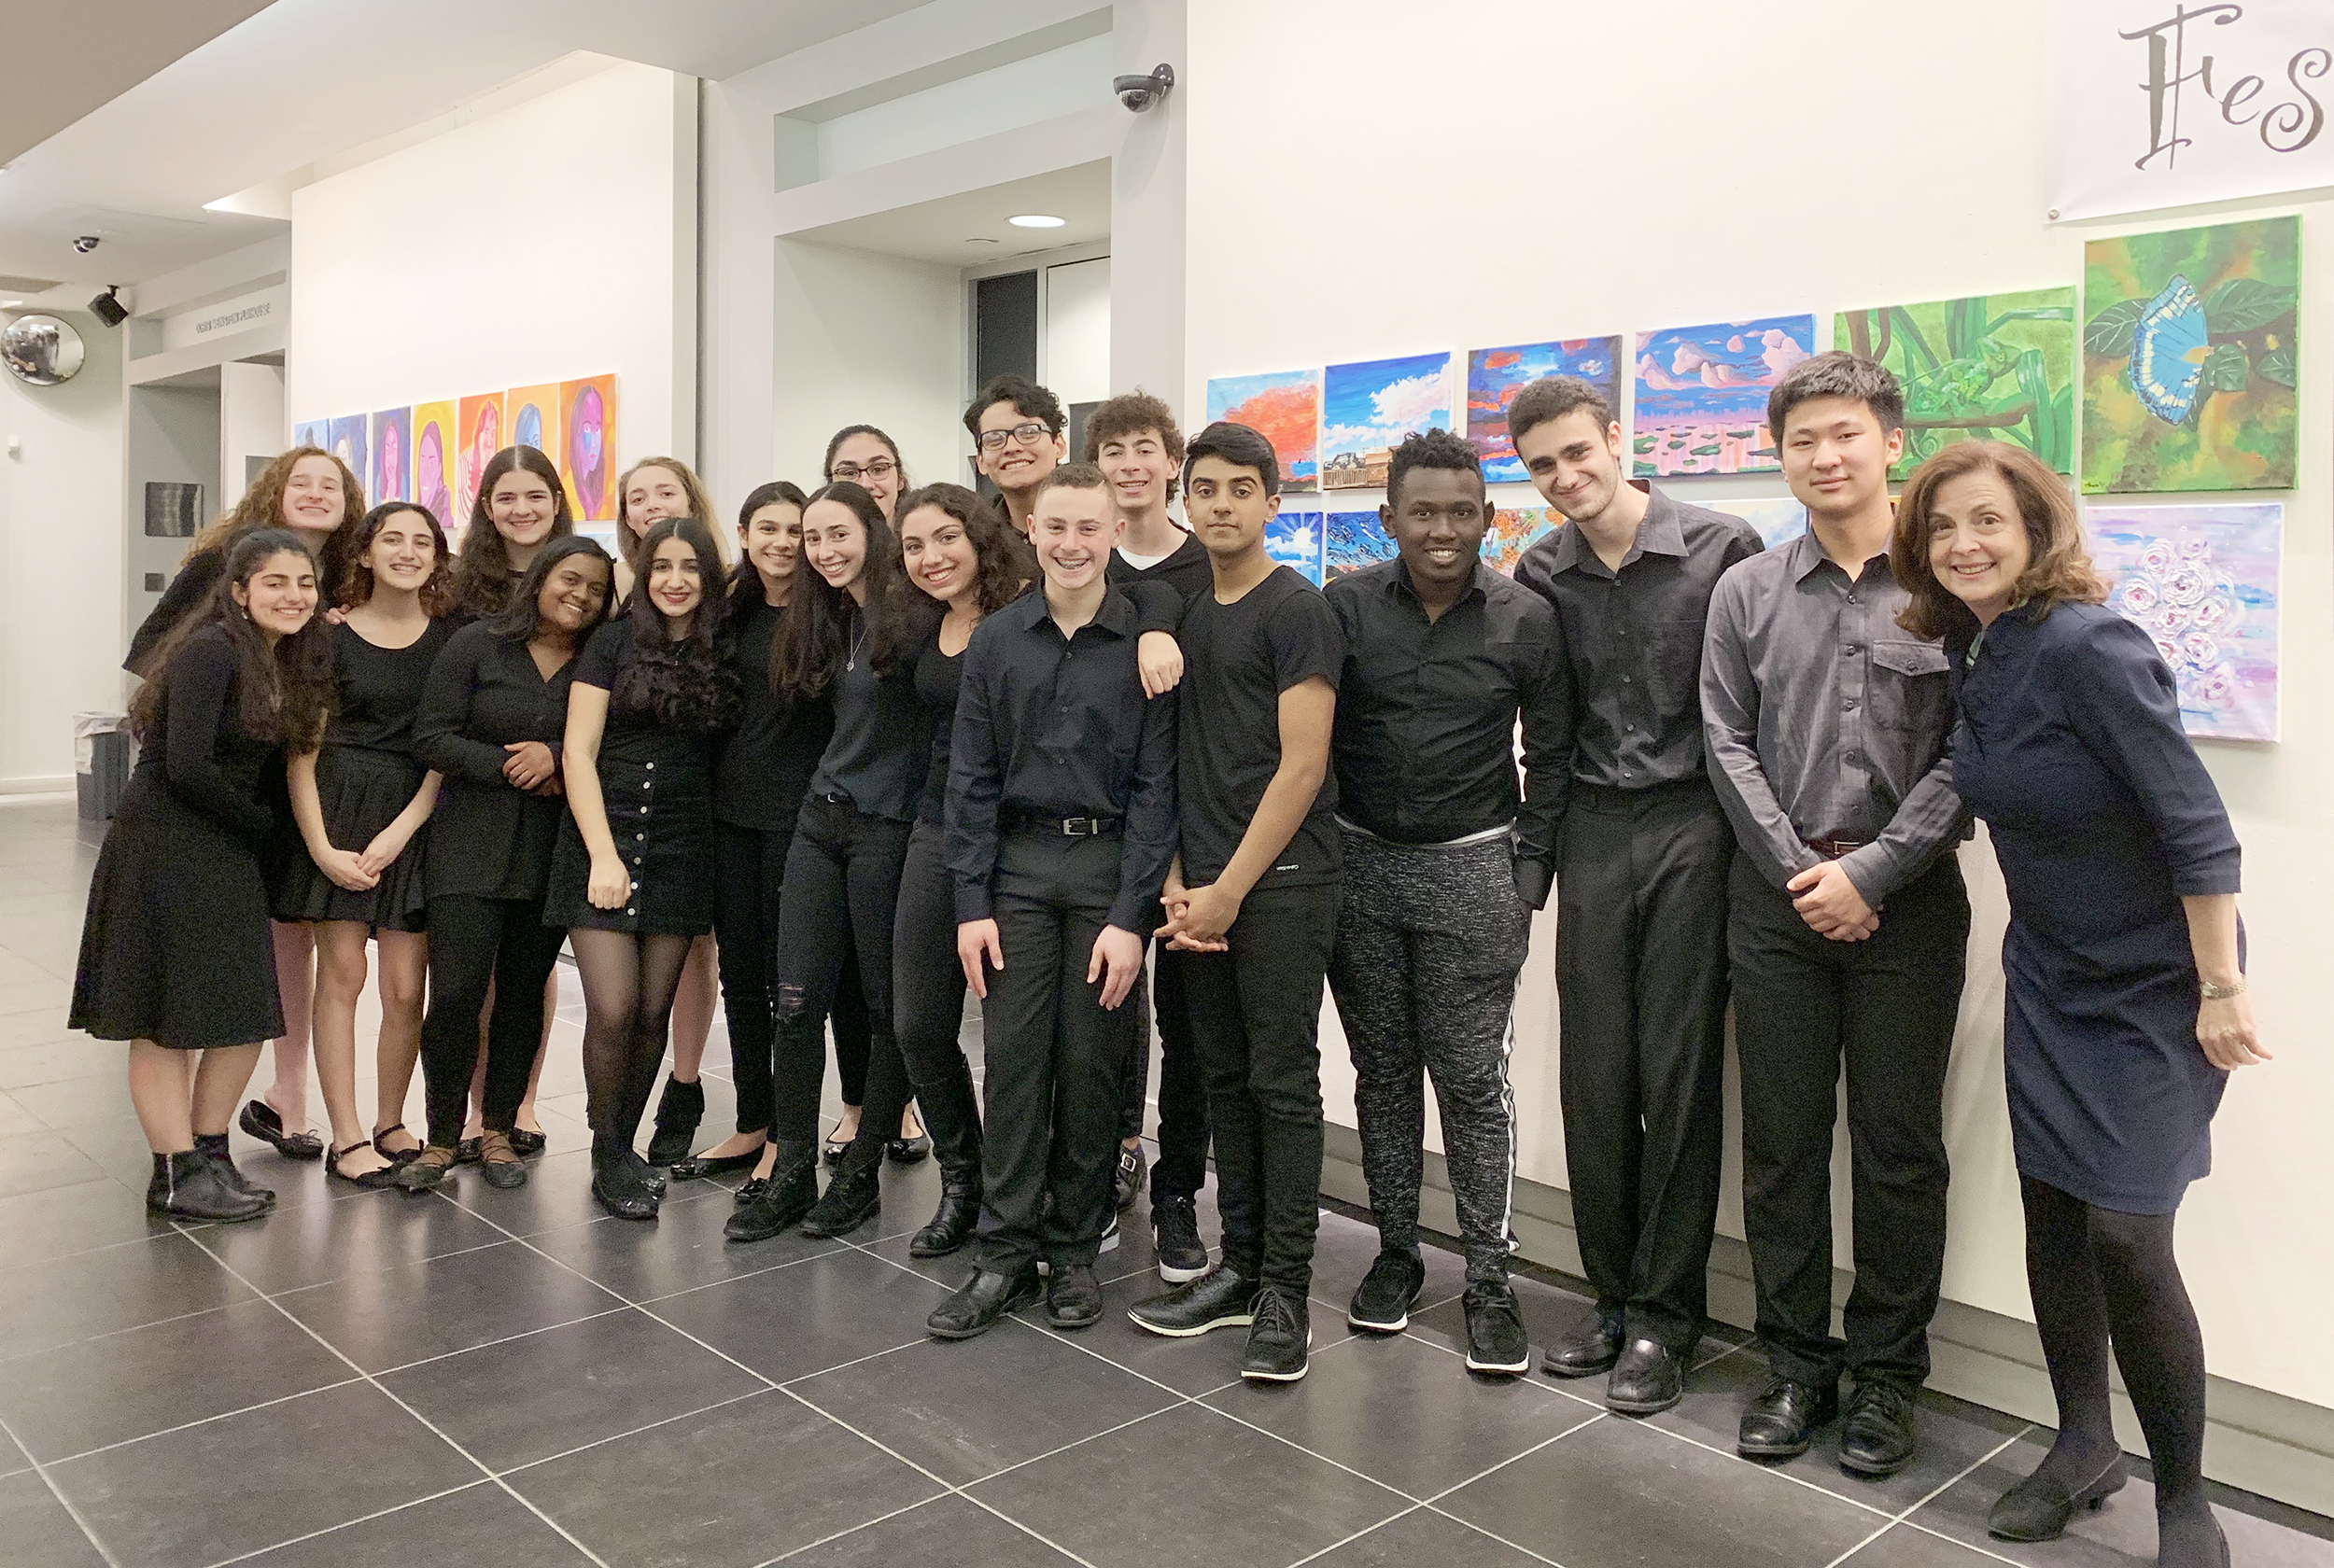 The North High A Capella Choir and Yale Whiffenpoofs performed together at the Gold Coast Arts Center. (Photo courtesy of the Great Neck Public Schools)